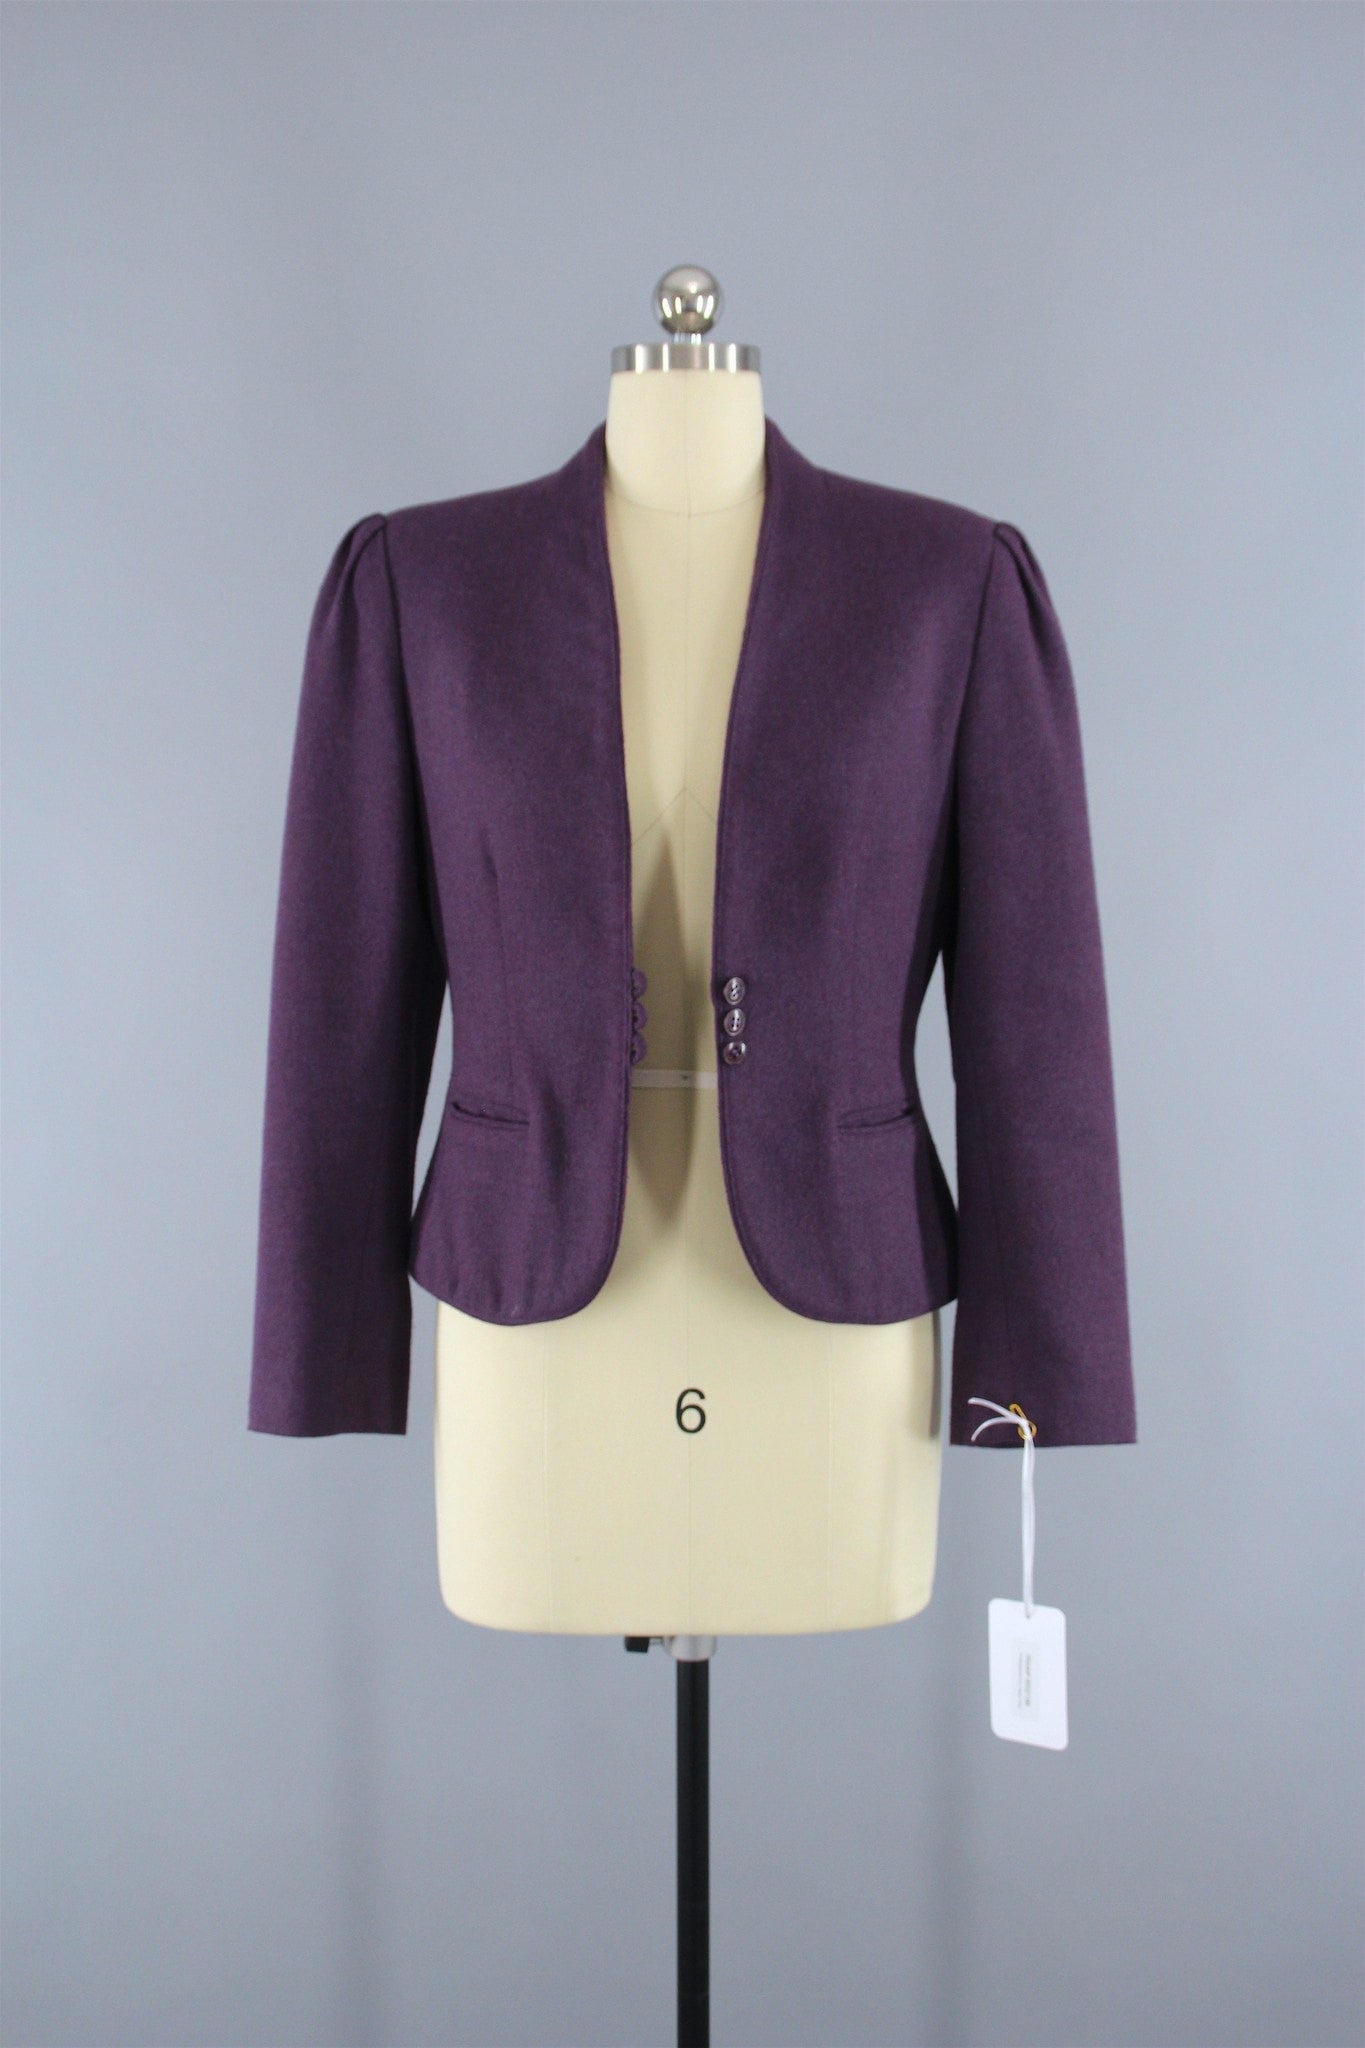 Vintage 1980s Wool Jacket by Margaret Godfrey for Bagatelle - ThisBlueBird